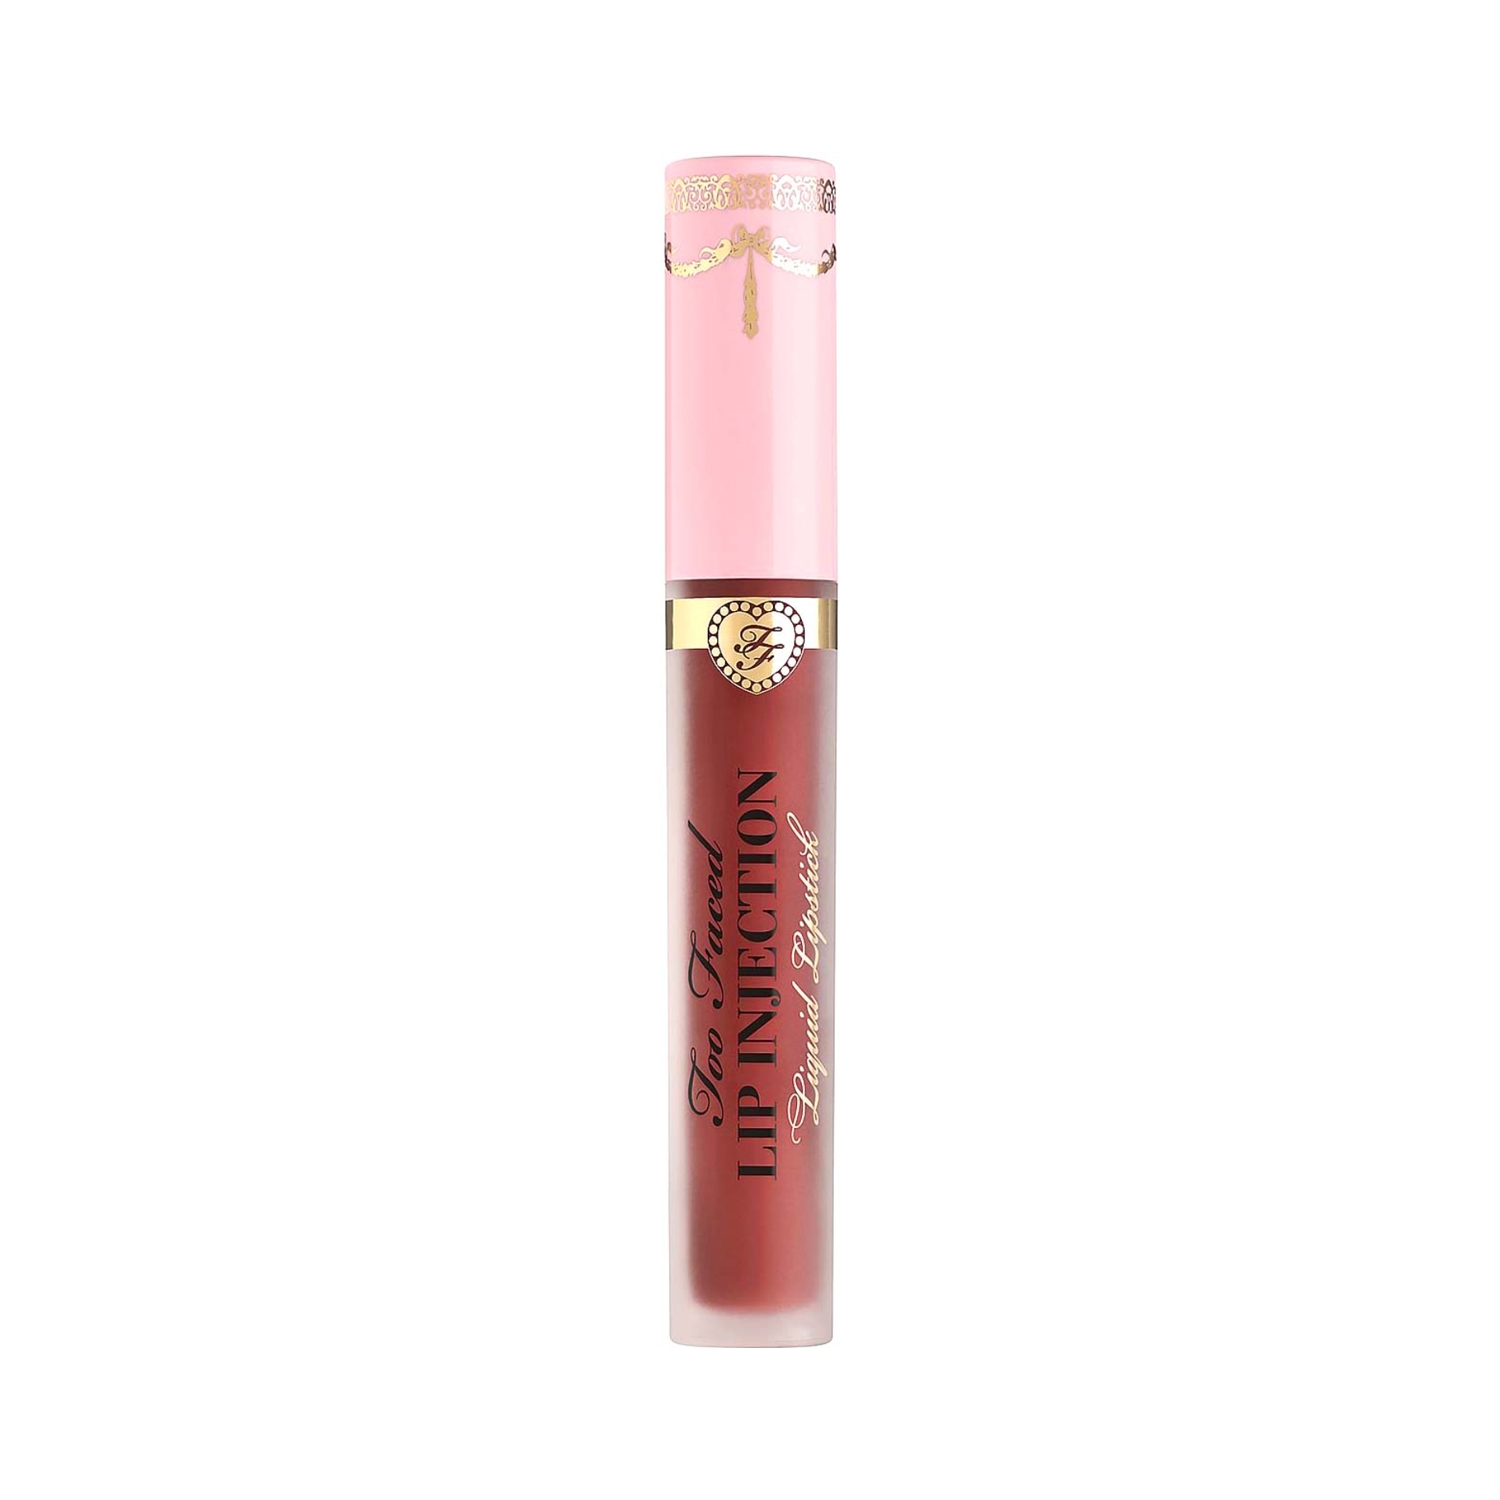 Too Faced | Too Faced Lip Injection Liquid Lipstick - Large & In Charge (3ml)